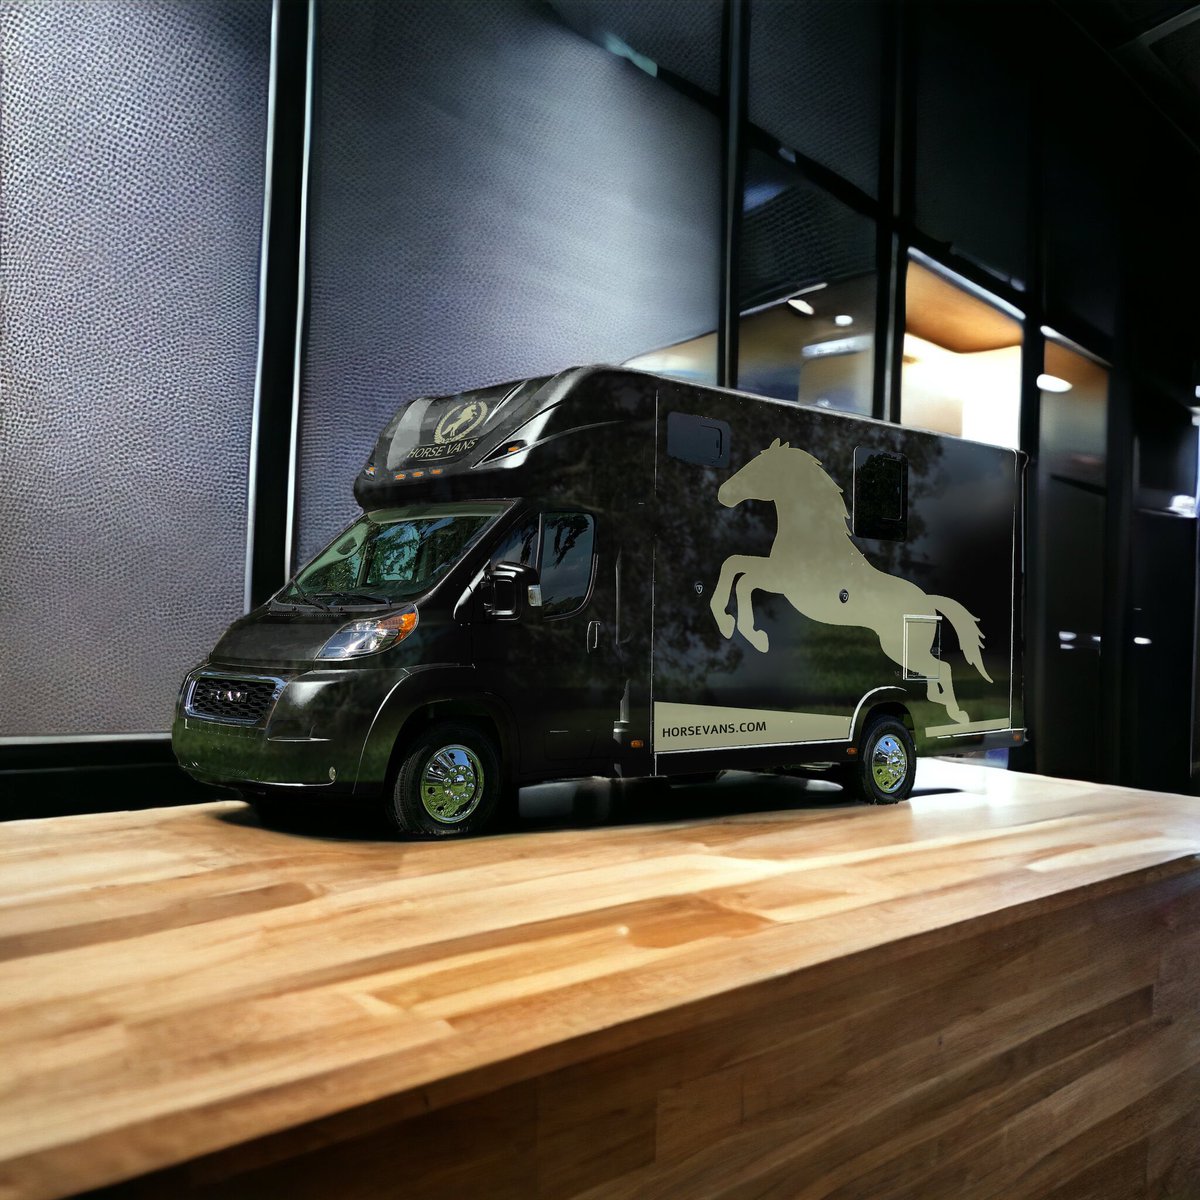 'A great horsebox will change your life. The truly special ones define it...' - Horse Vans

#horsevans #horses #equinesports #horsesofig #horsesofinstagram #equine #equinelife #horsevansforsale #forsale #equestriannews #equestrianworld 
#horsegram #equestriansport #horseboxes